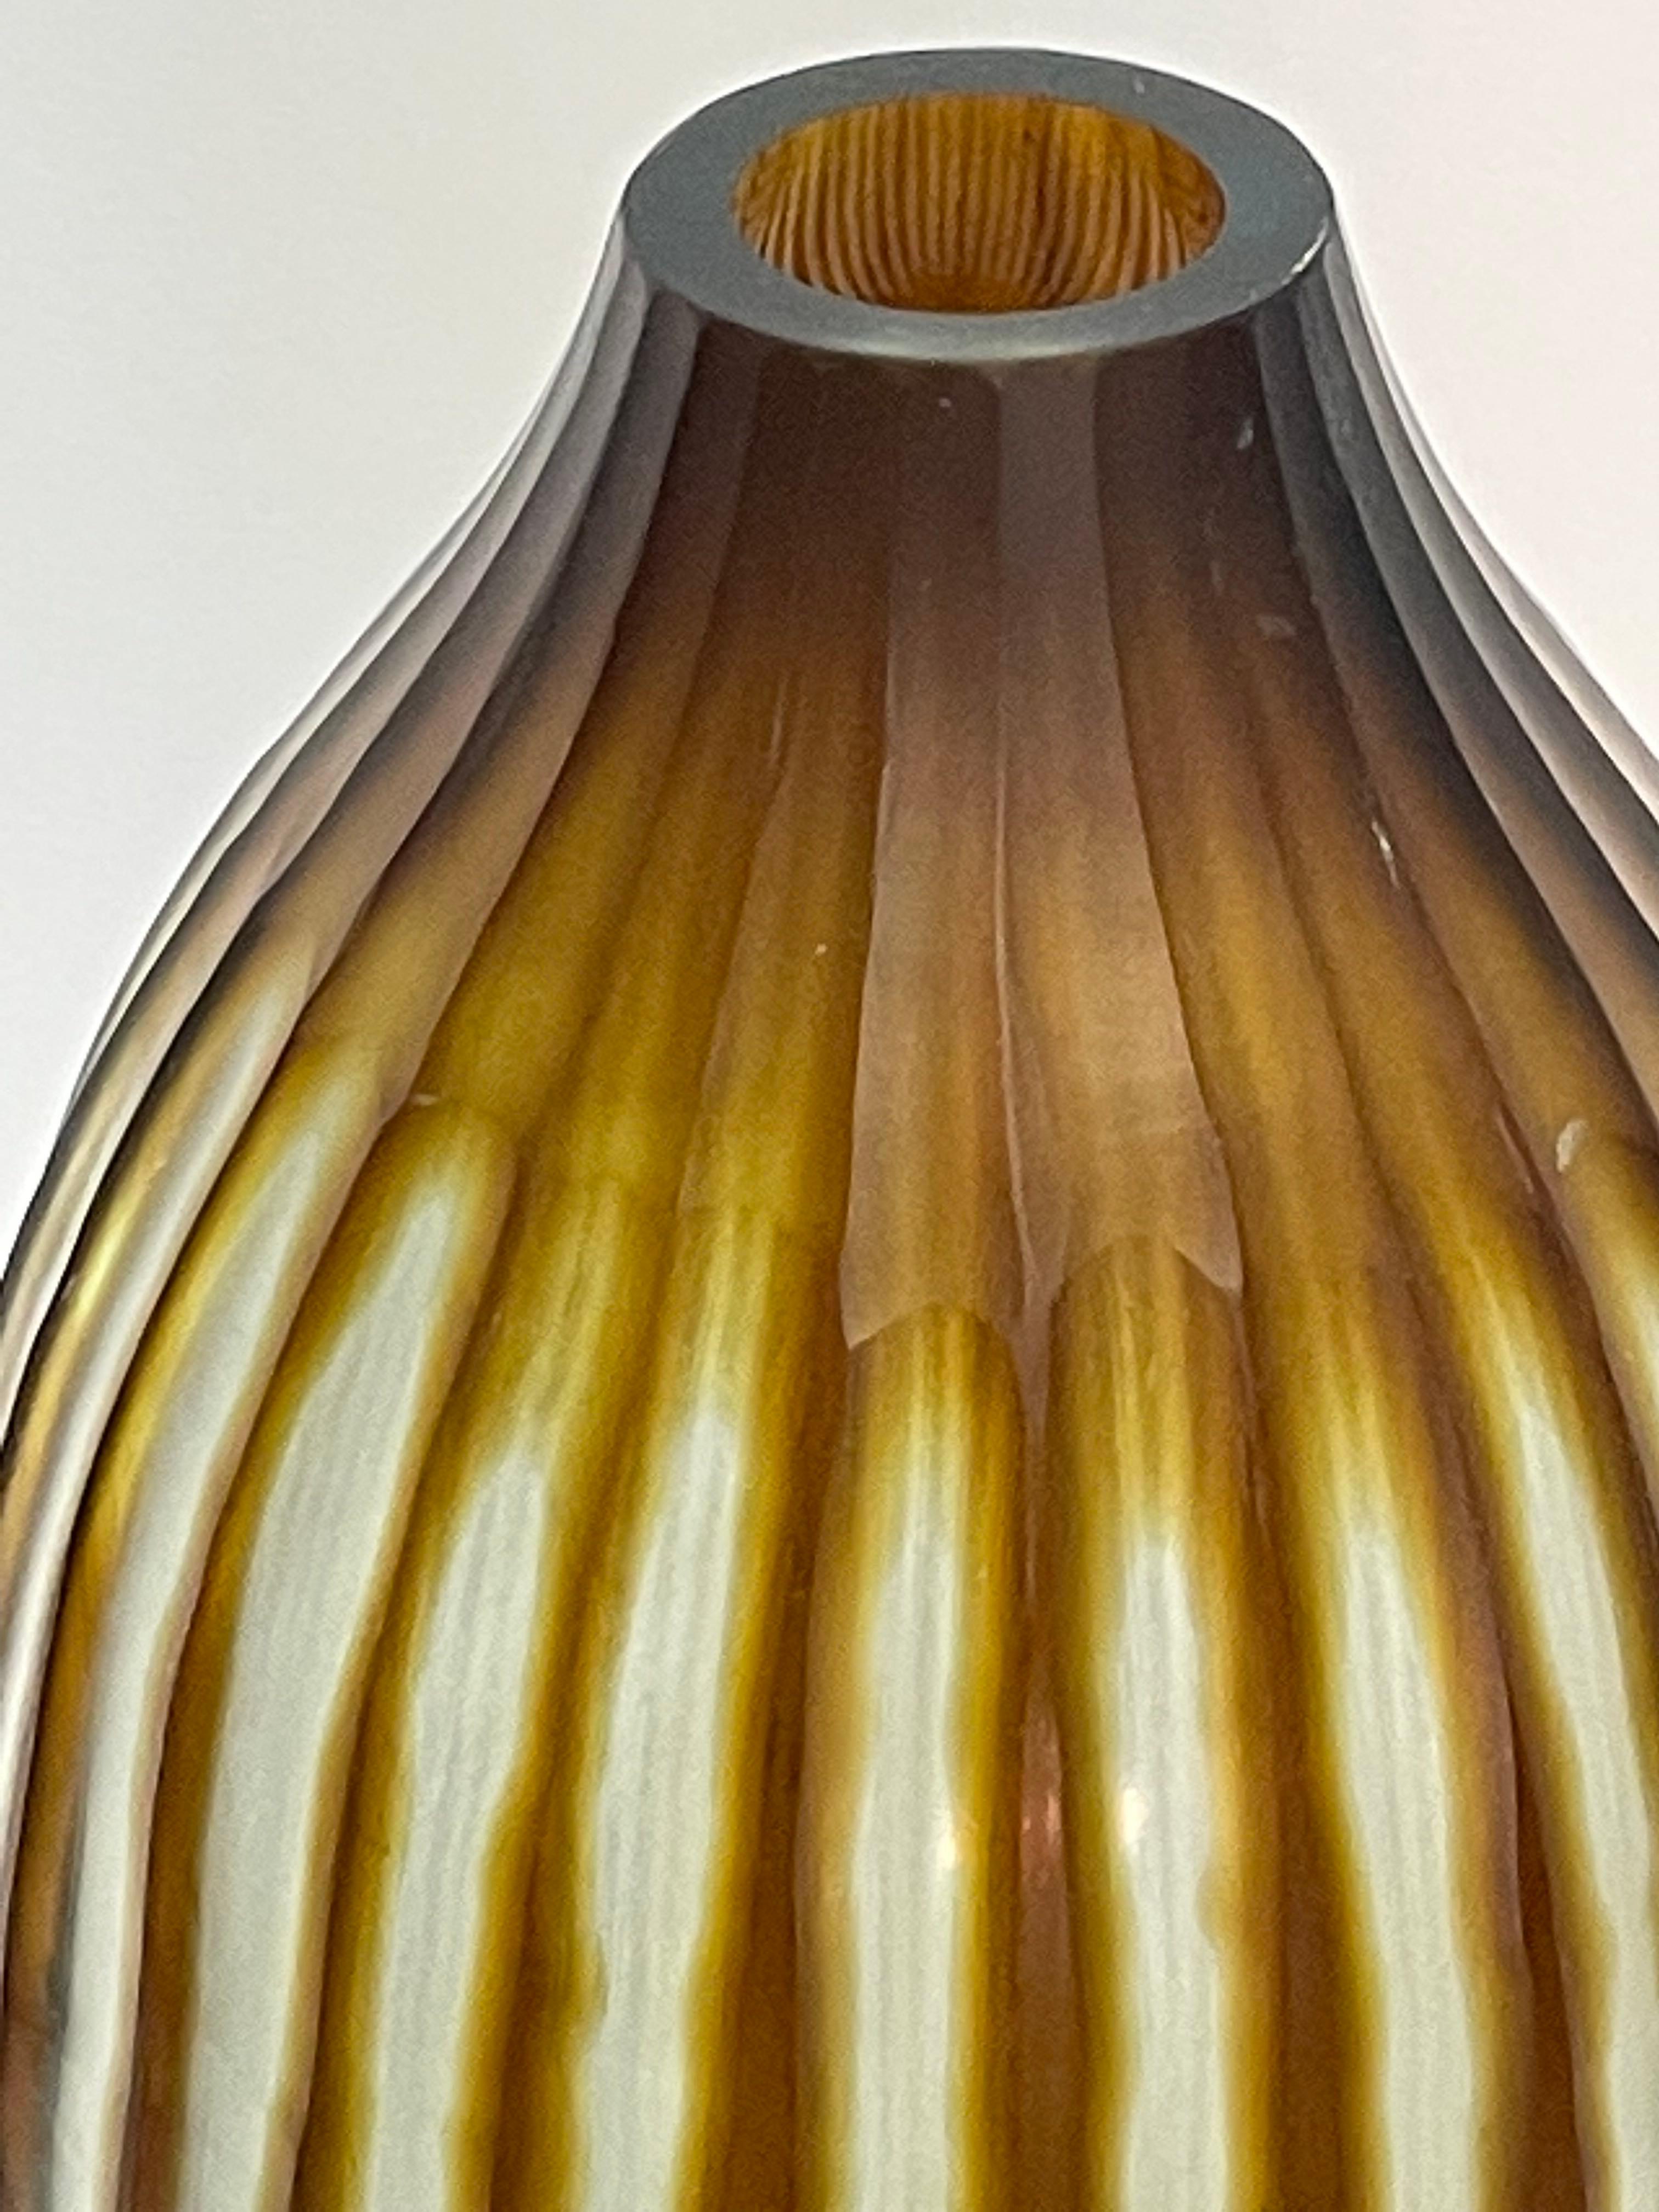 Contemporary Romanian vertical ribbed and striped brown glass vase.
Tall cylinder shape.
Sits well with taller version S6116.